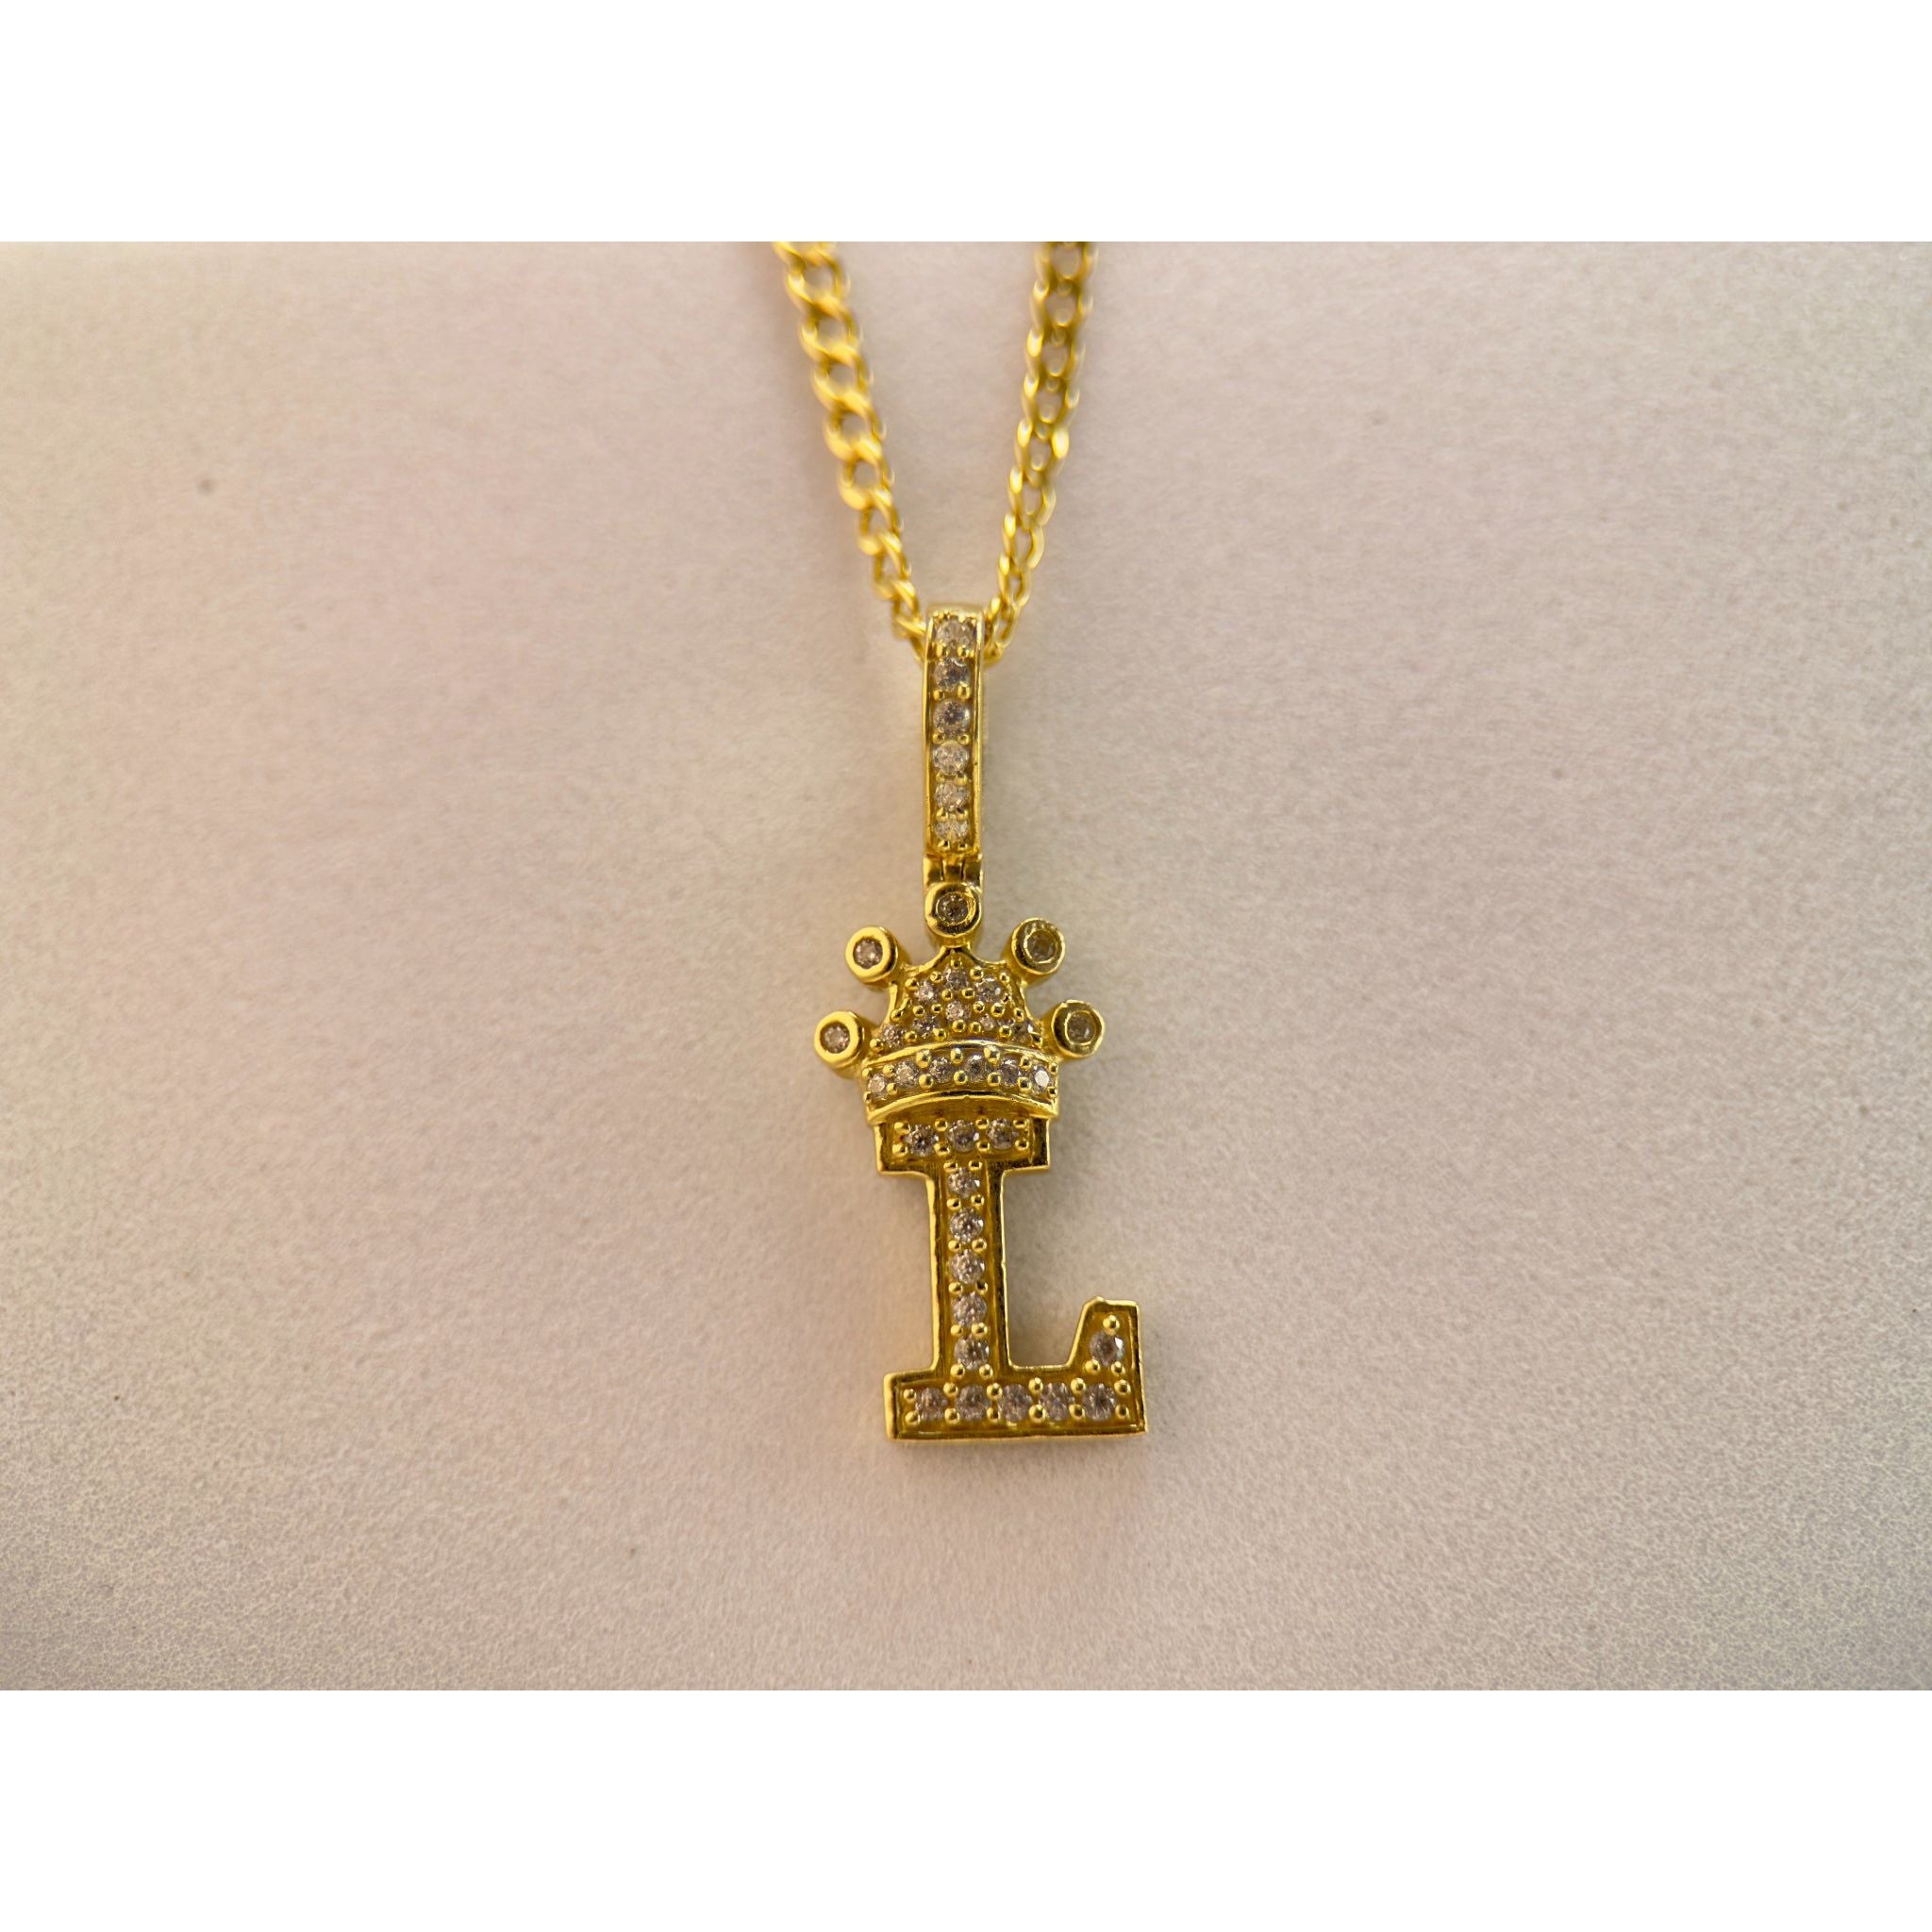 DR1938 - 10K Yellow Gold - Lab Created Stones - Gold Chain & Charm - Letter L w/Crown